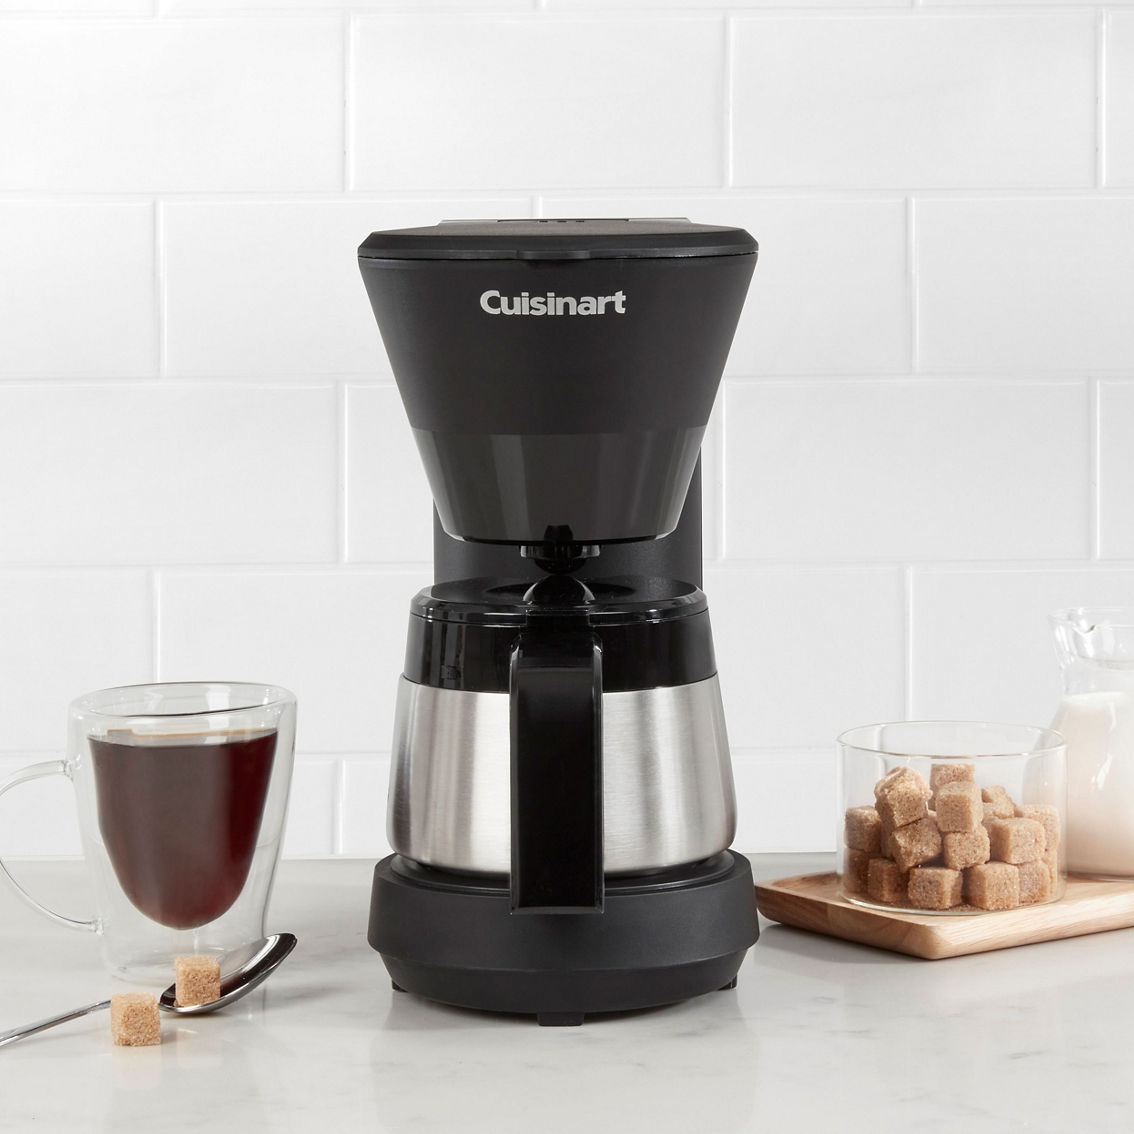 Cuisinart 5-Cup Coffeemaker with Stainless Steel Carafe - Image 4 of 4